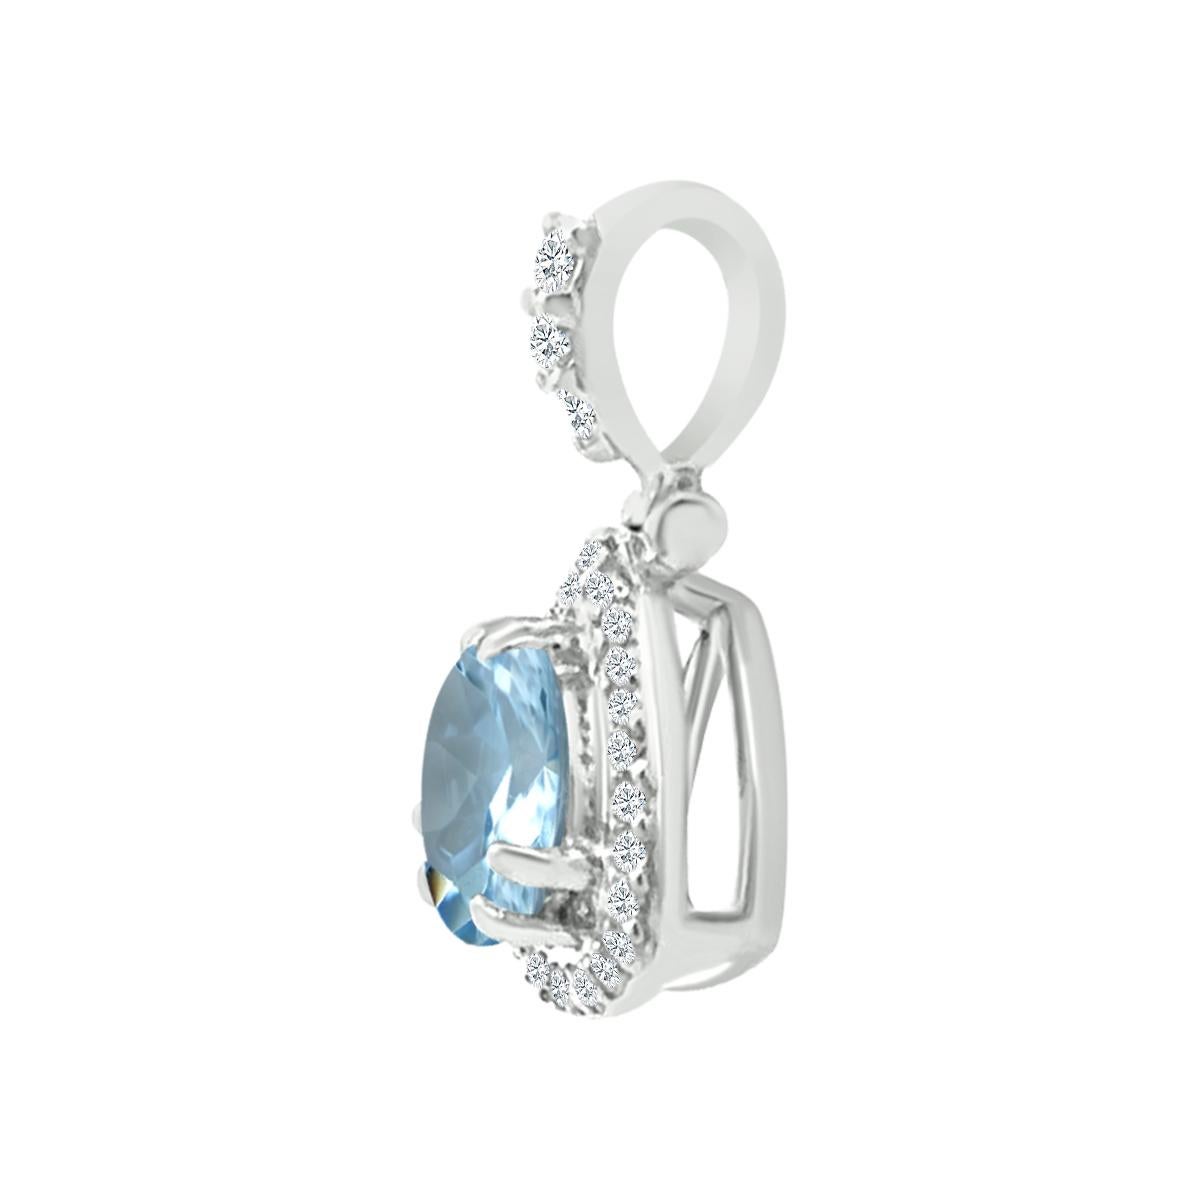 A Shimmering Statement In A Lovely Blue Hue, This Gemstone And Diamond Pendant Feature A Light Blue 6mm Round Cut Gemstone Along With Round Diamonds Creating A Wall Of Brilliance And Fire In A Pave Setting Further Enhancing The Stunning Shape Of The